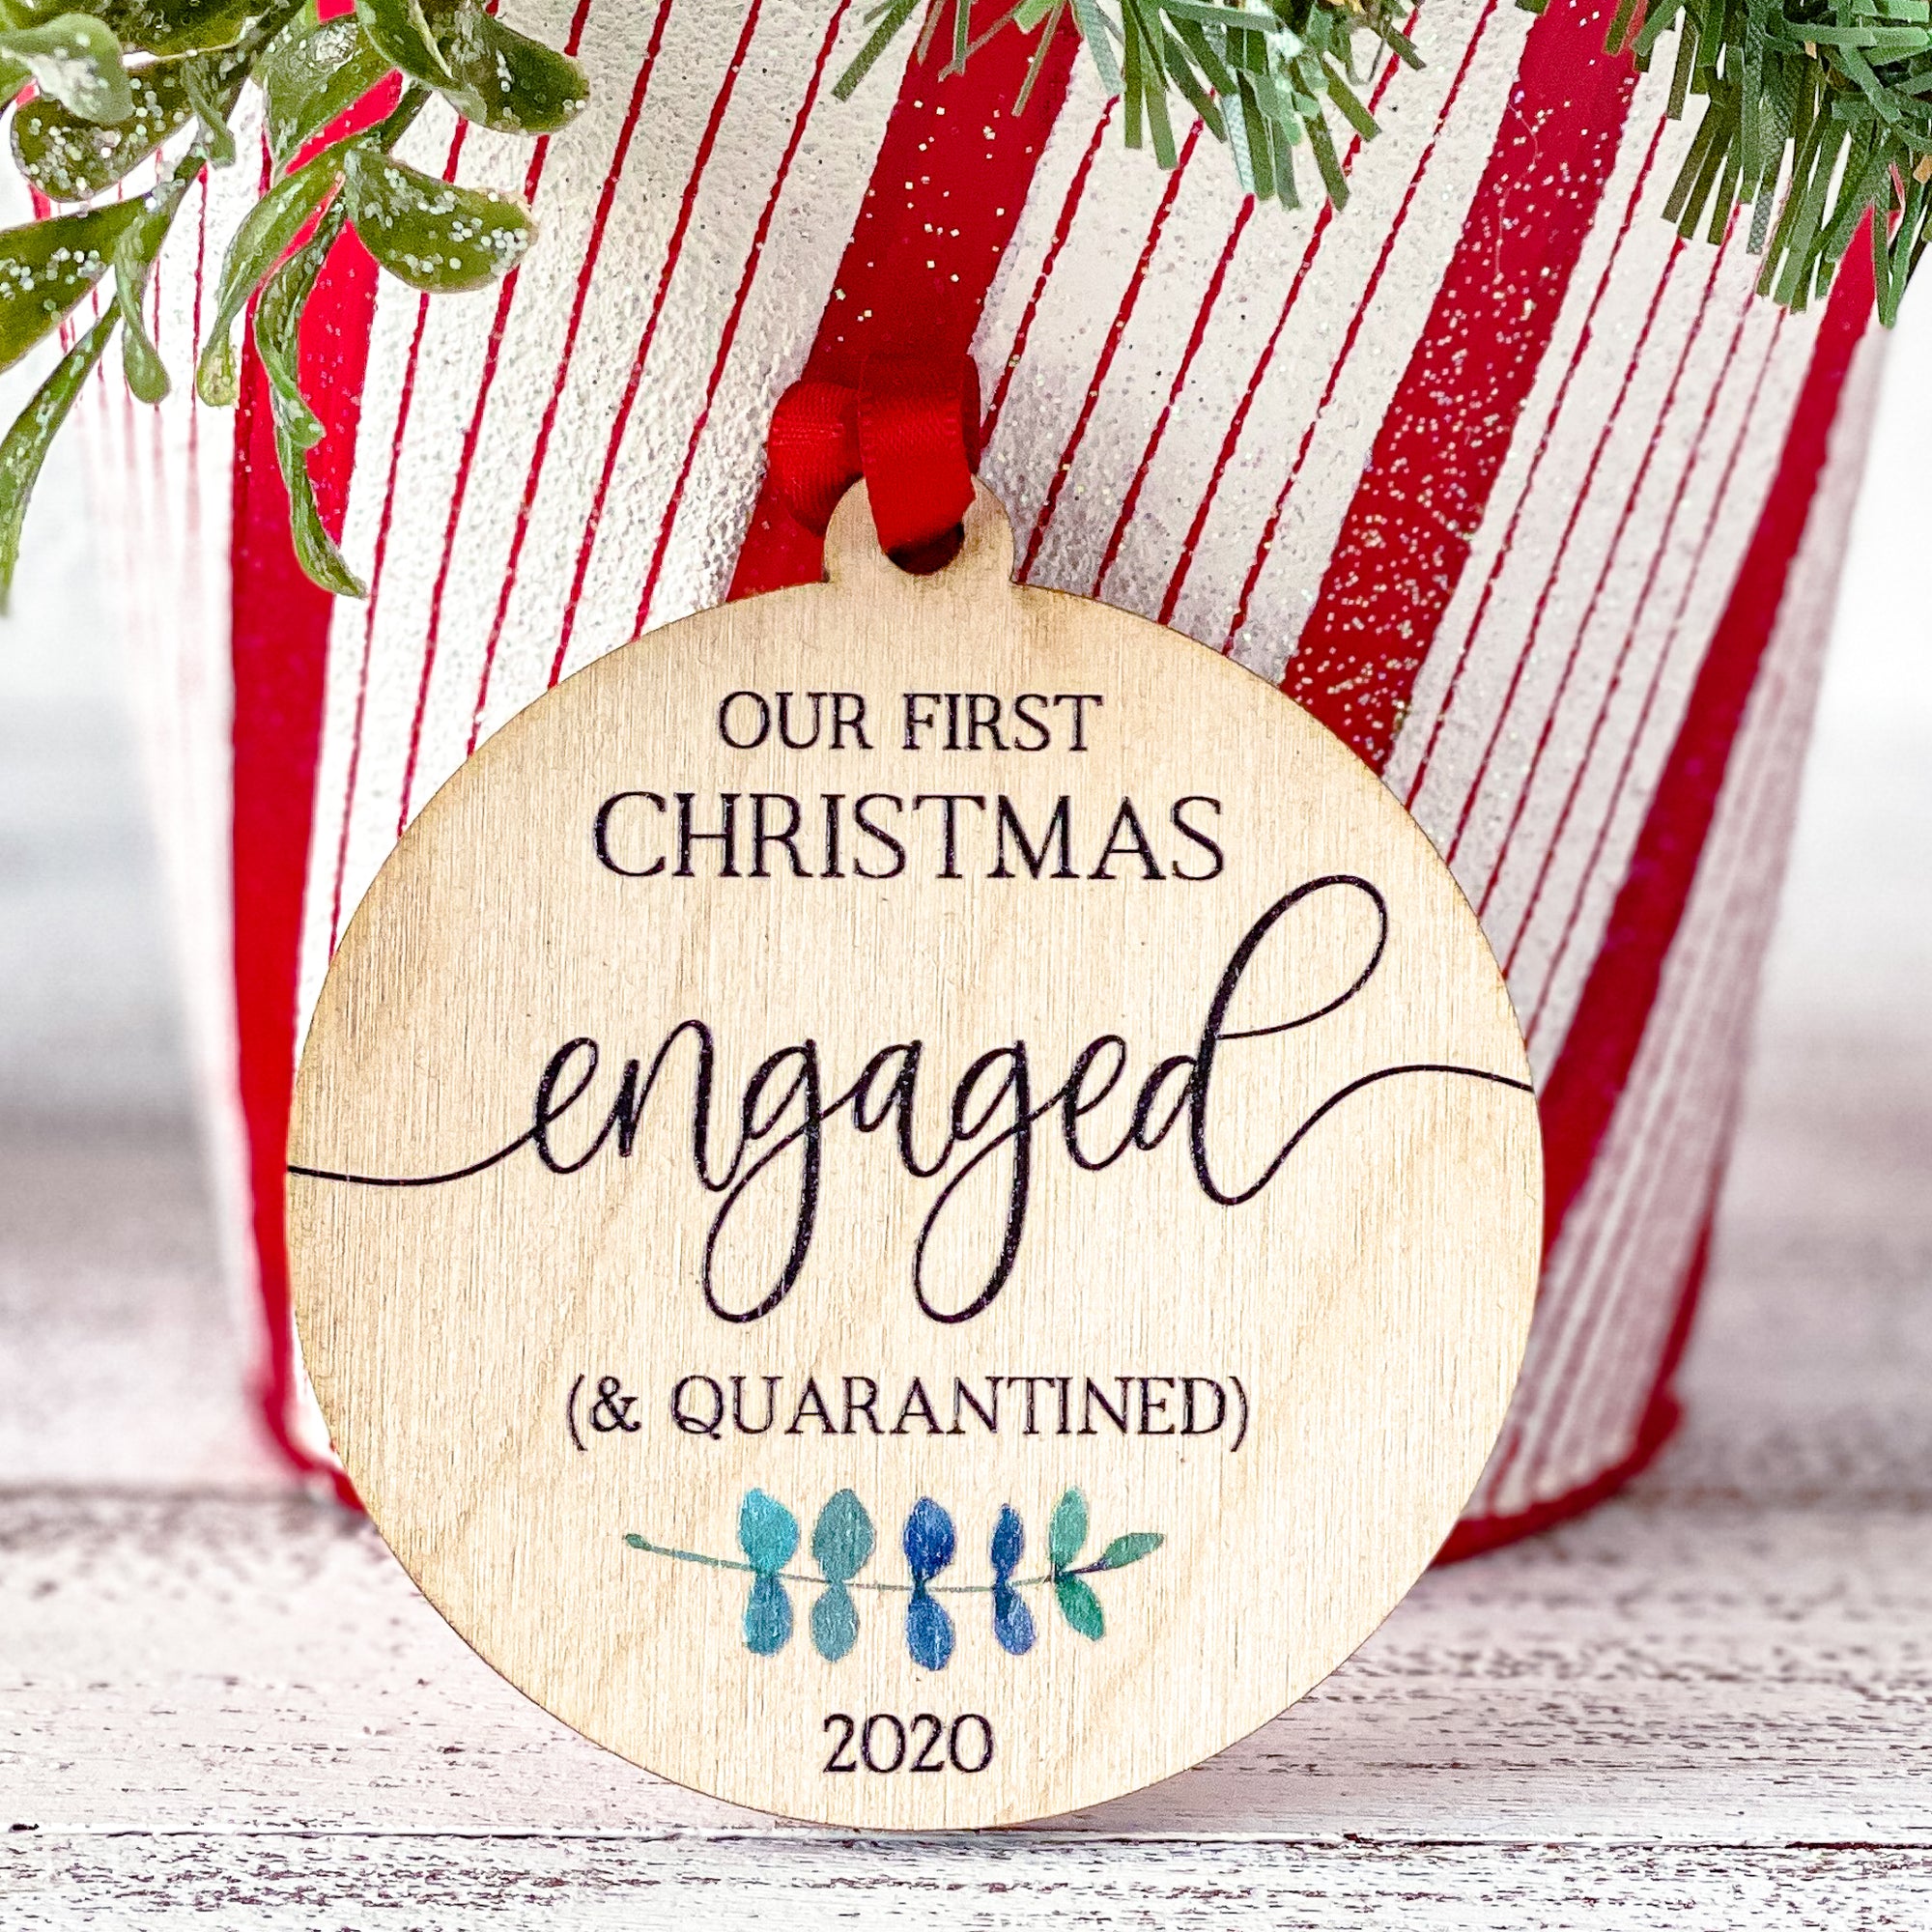 Our First Christmas Engaged & Quarantined Round Wooden Ornament